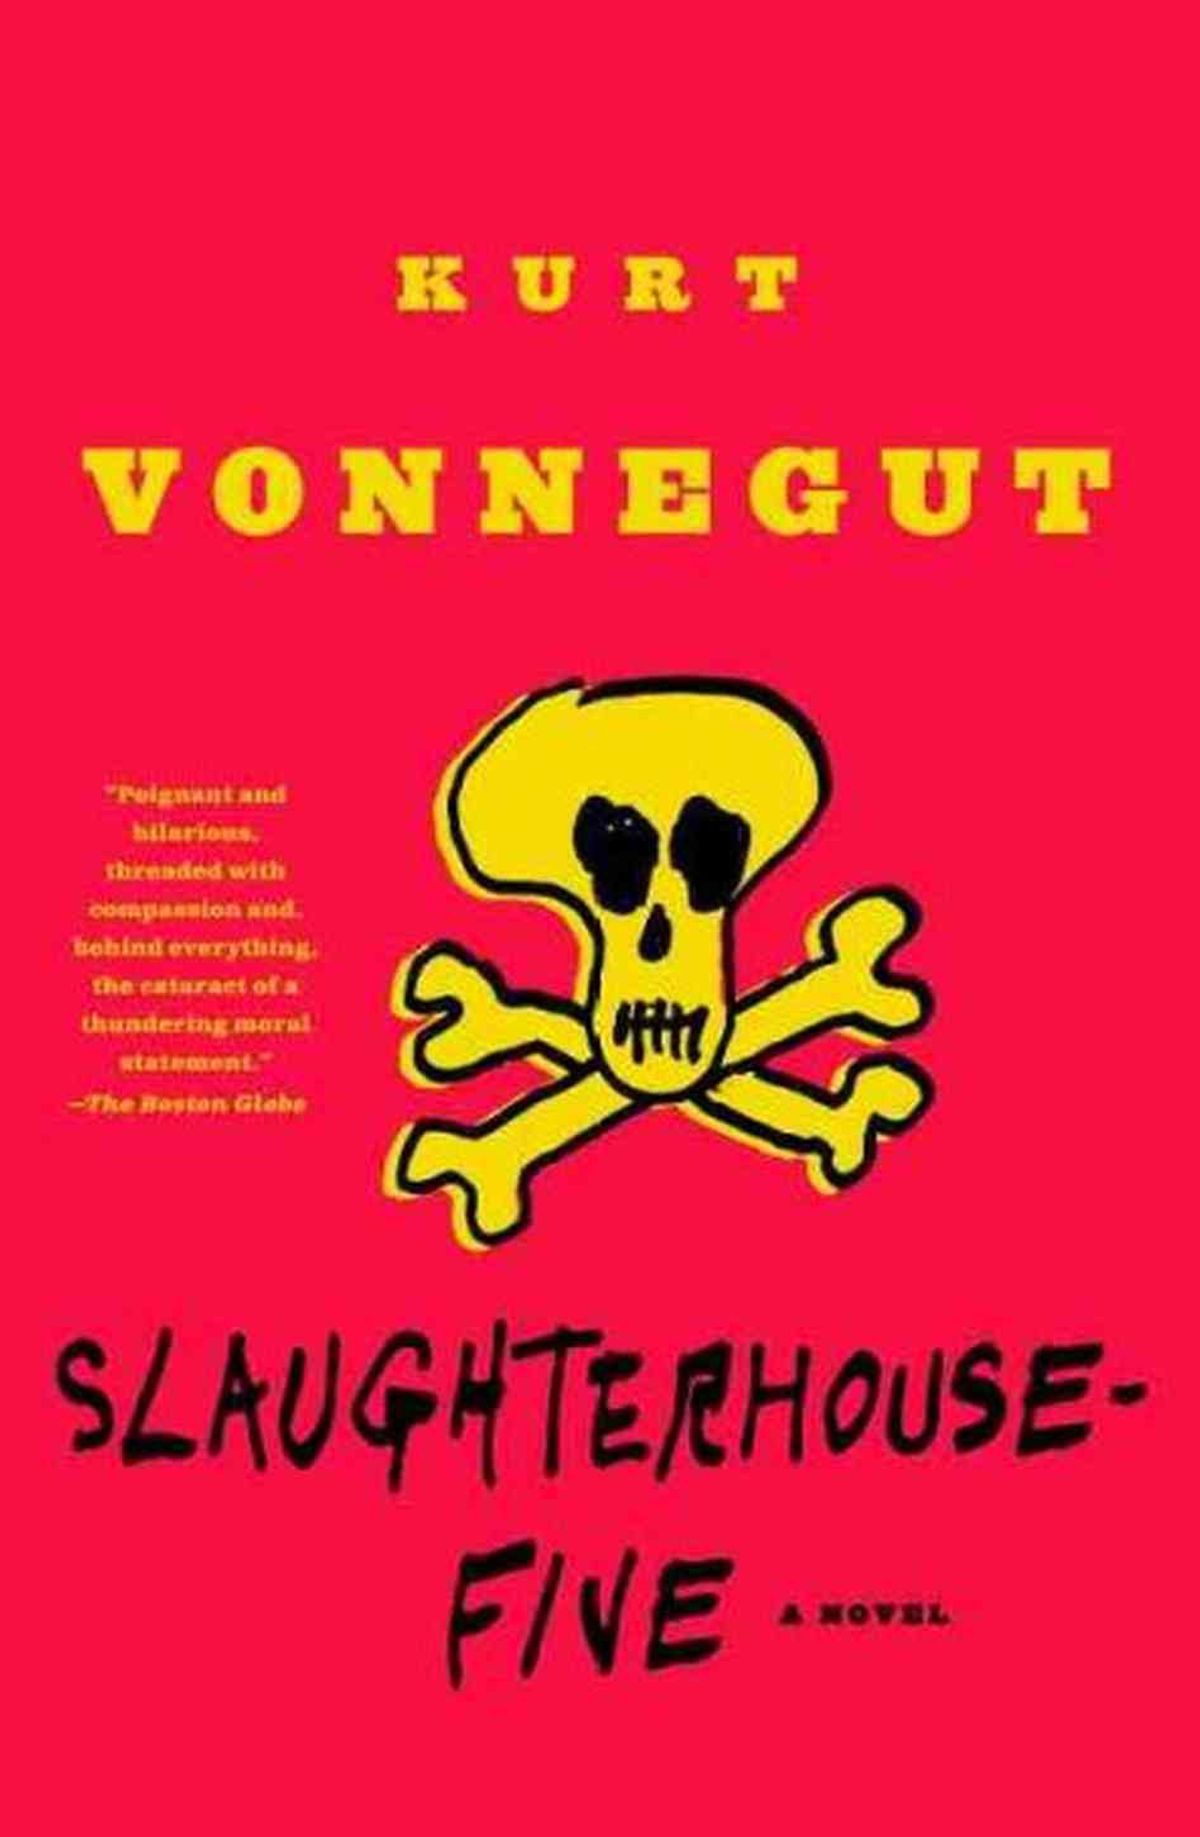 The Voices of the Discontent and Slaughterhouse Five